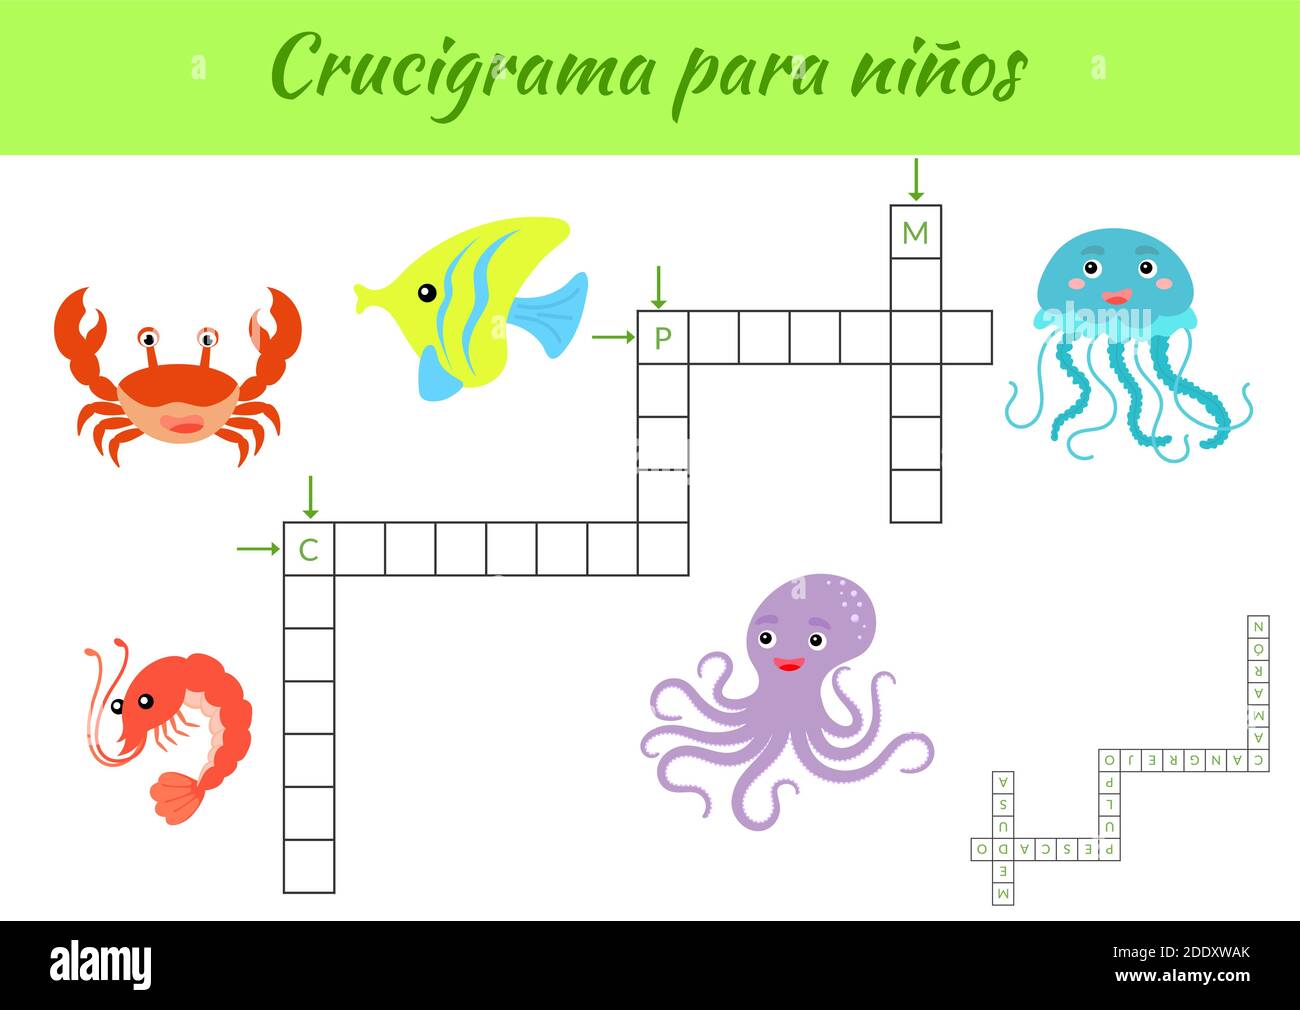 Crucigrama para niños - Crossword for kids. Crossword game with pictures. Kids activity worksheet colorful printable version. Stock Vector